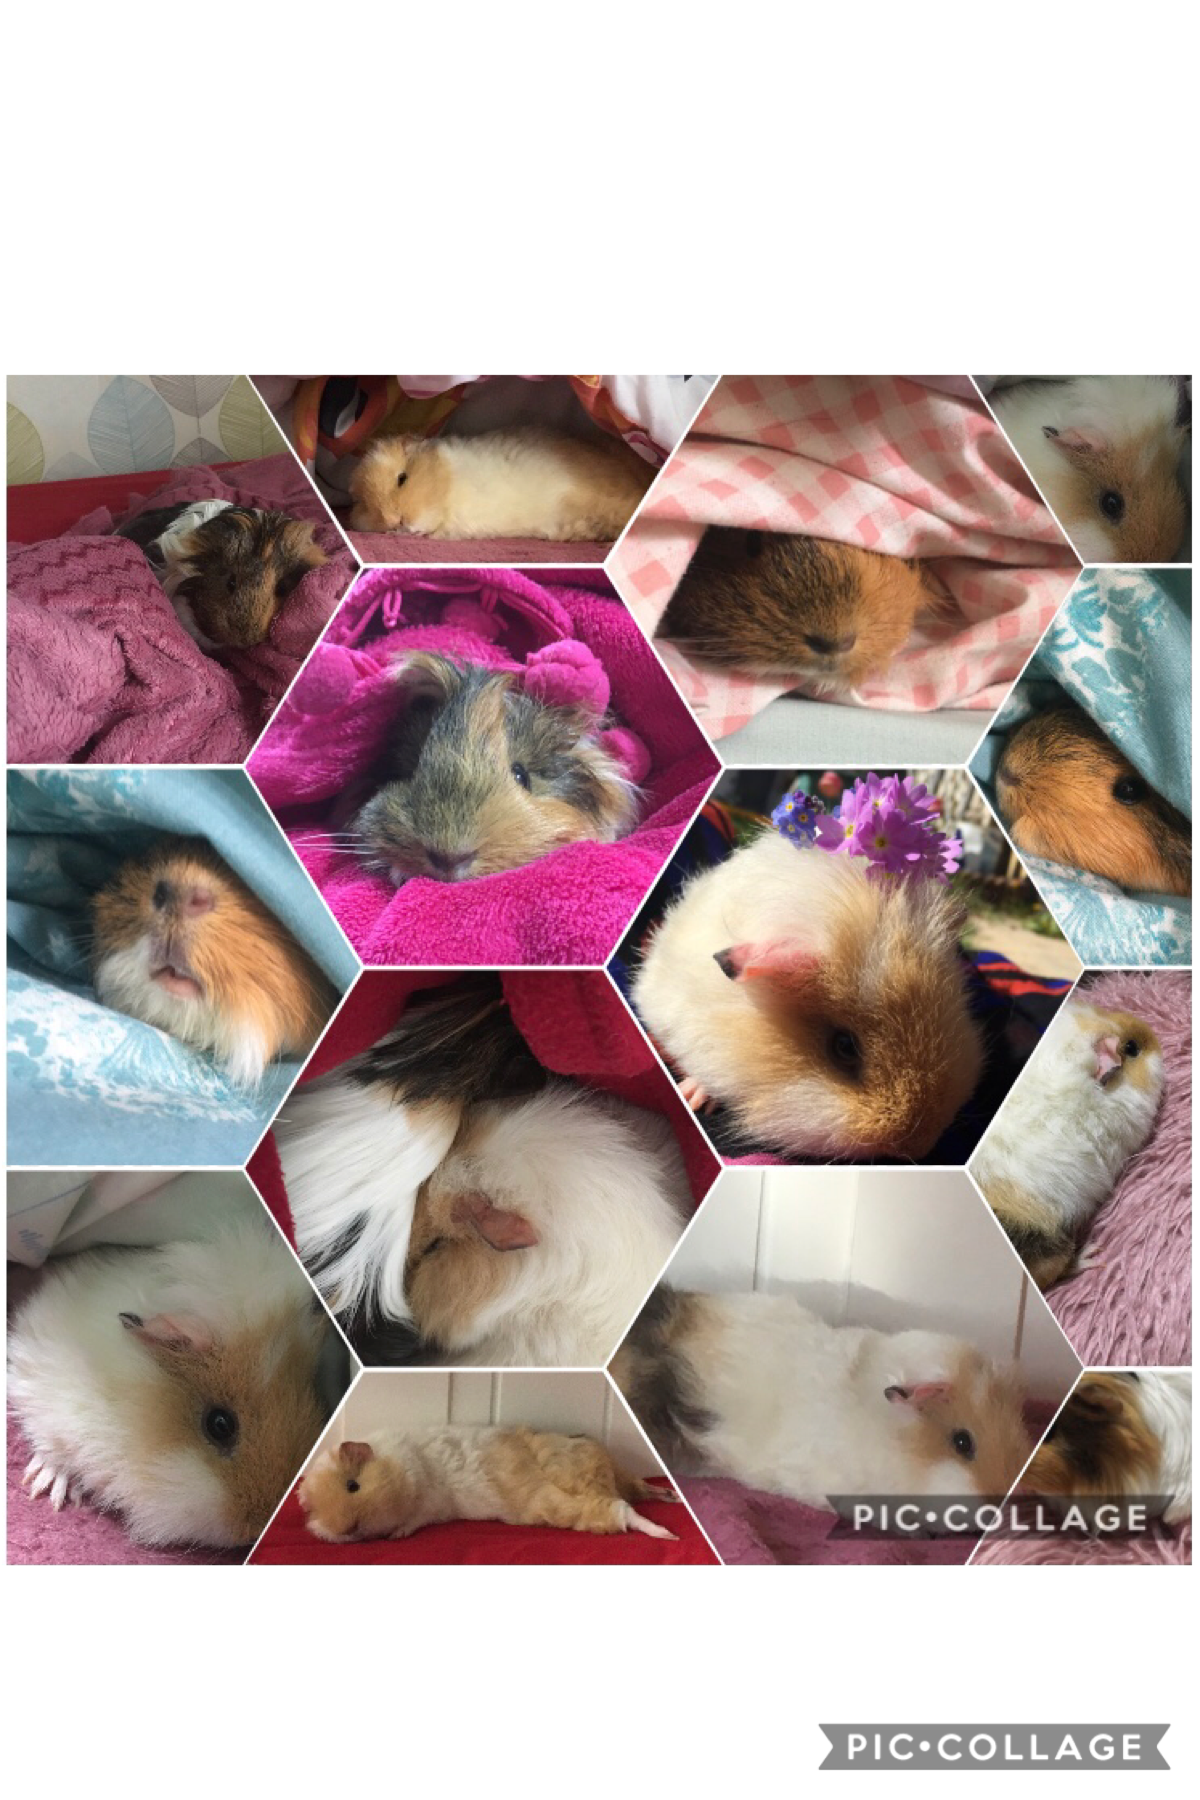 These are my favourite pictures of my guinea pigs
Stay safe everyone ❤️❤️❤️
